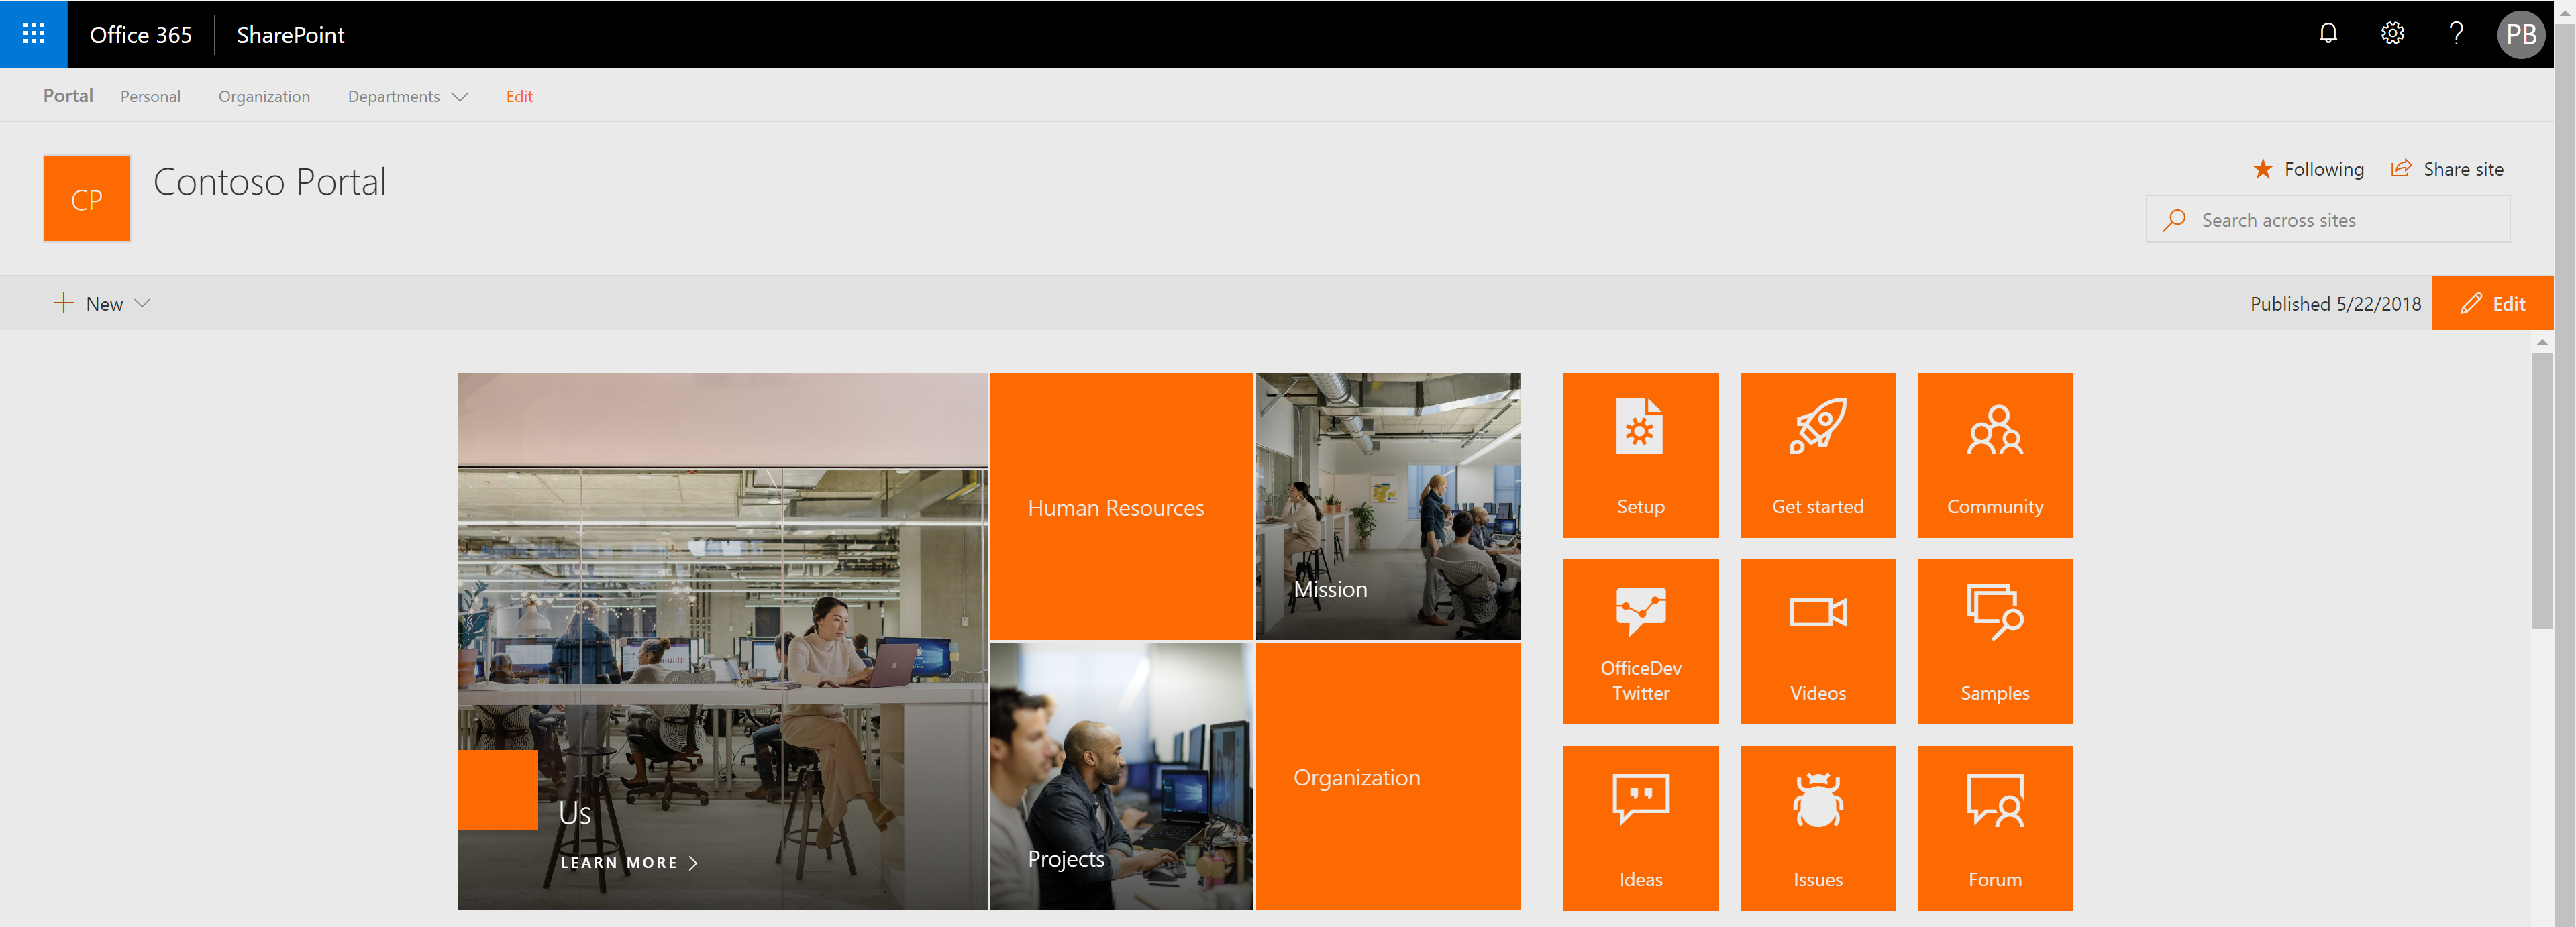 Getting started with the SharePoint Starter Kit from the PnP team